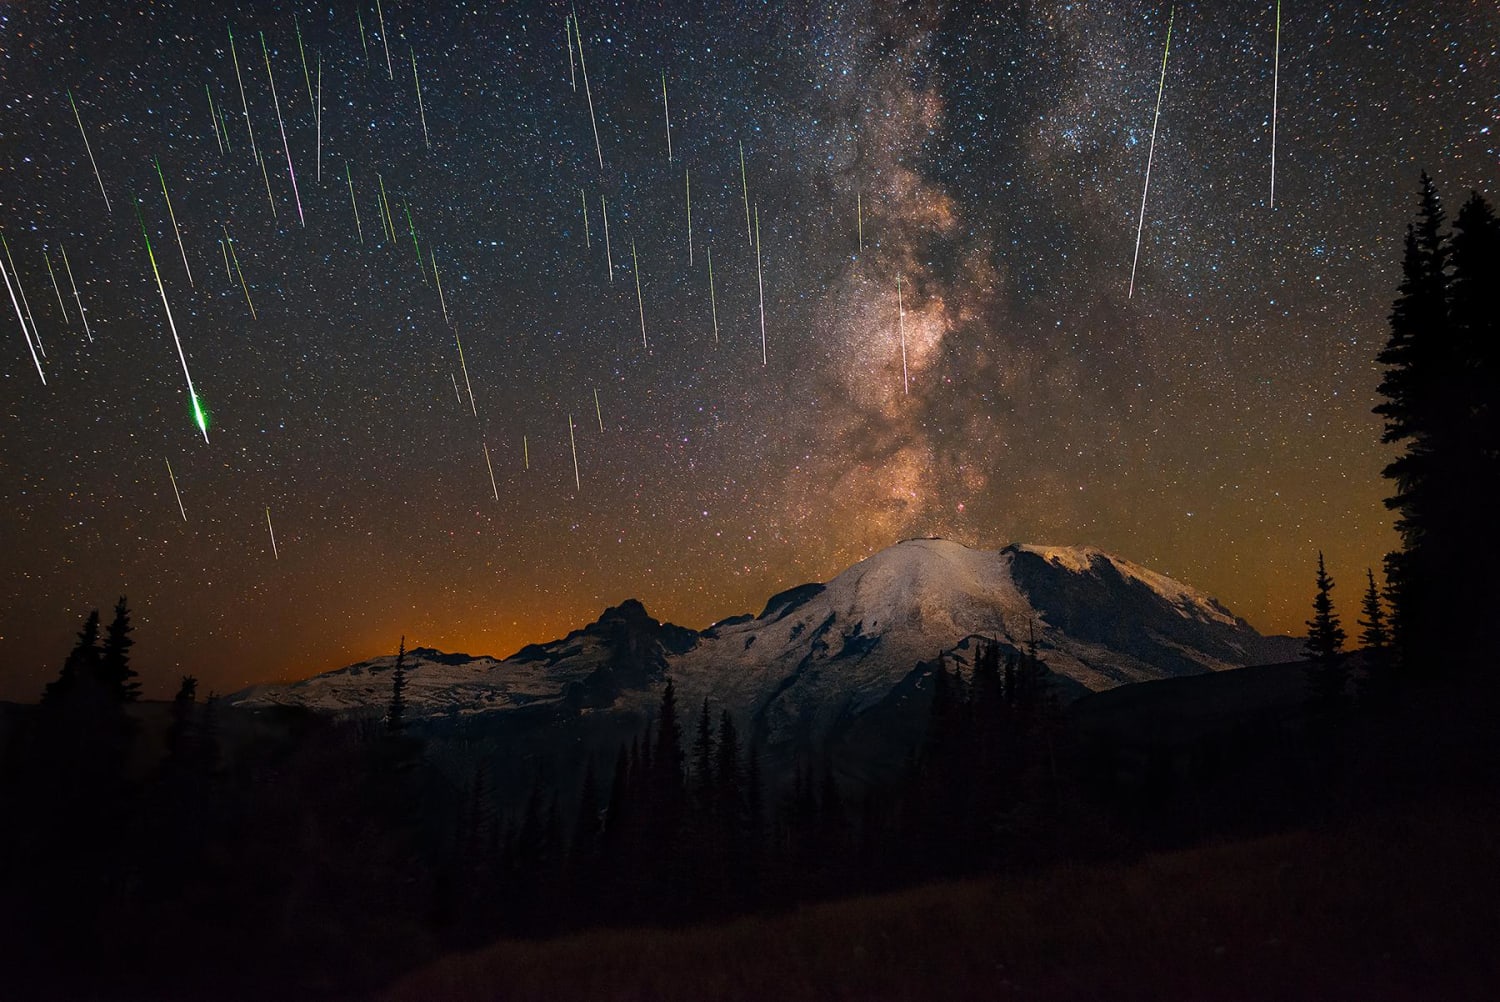 We counted over 200 Perseid Meteors and watched the Milky Way align over Mount Rainier as if it was erupting thousands of stars